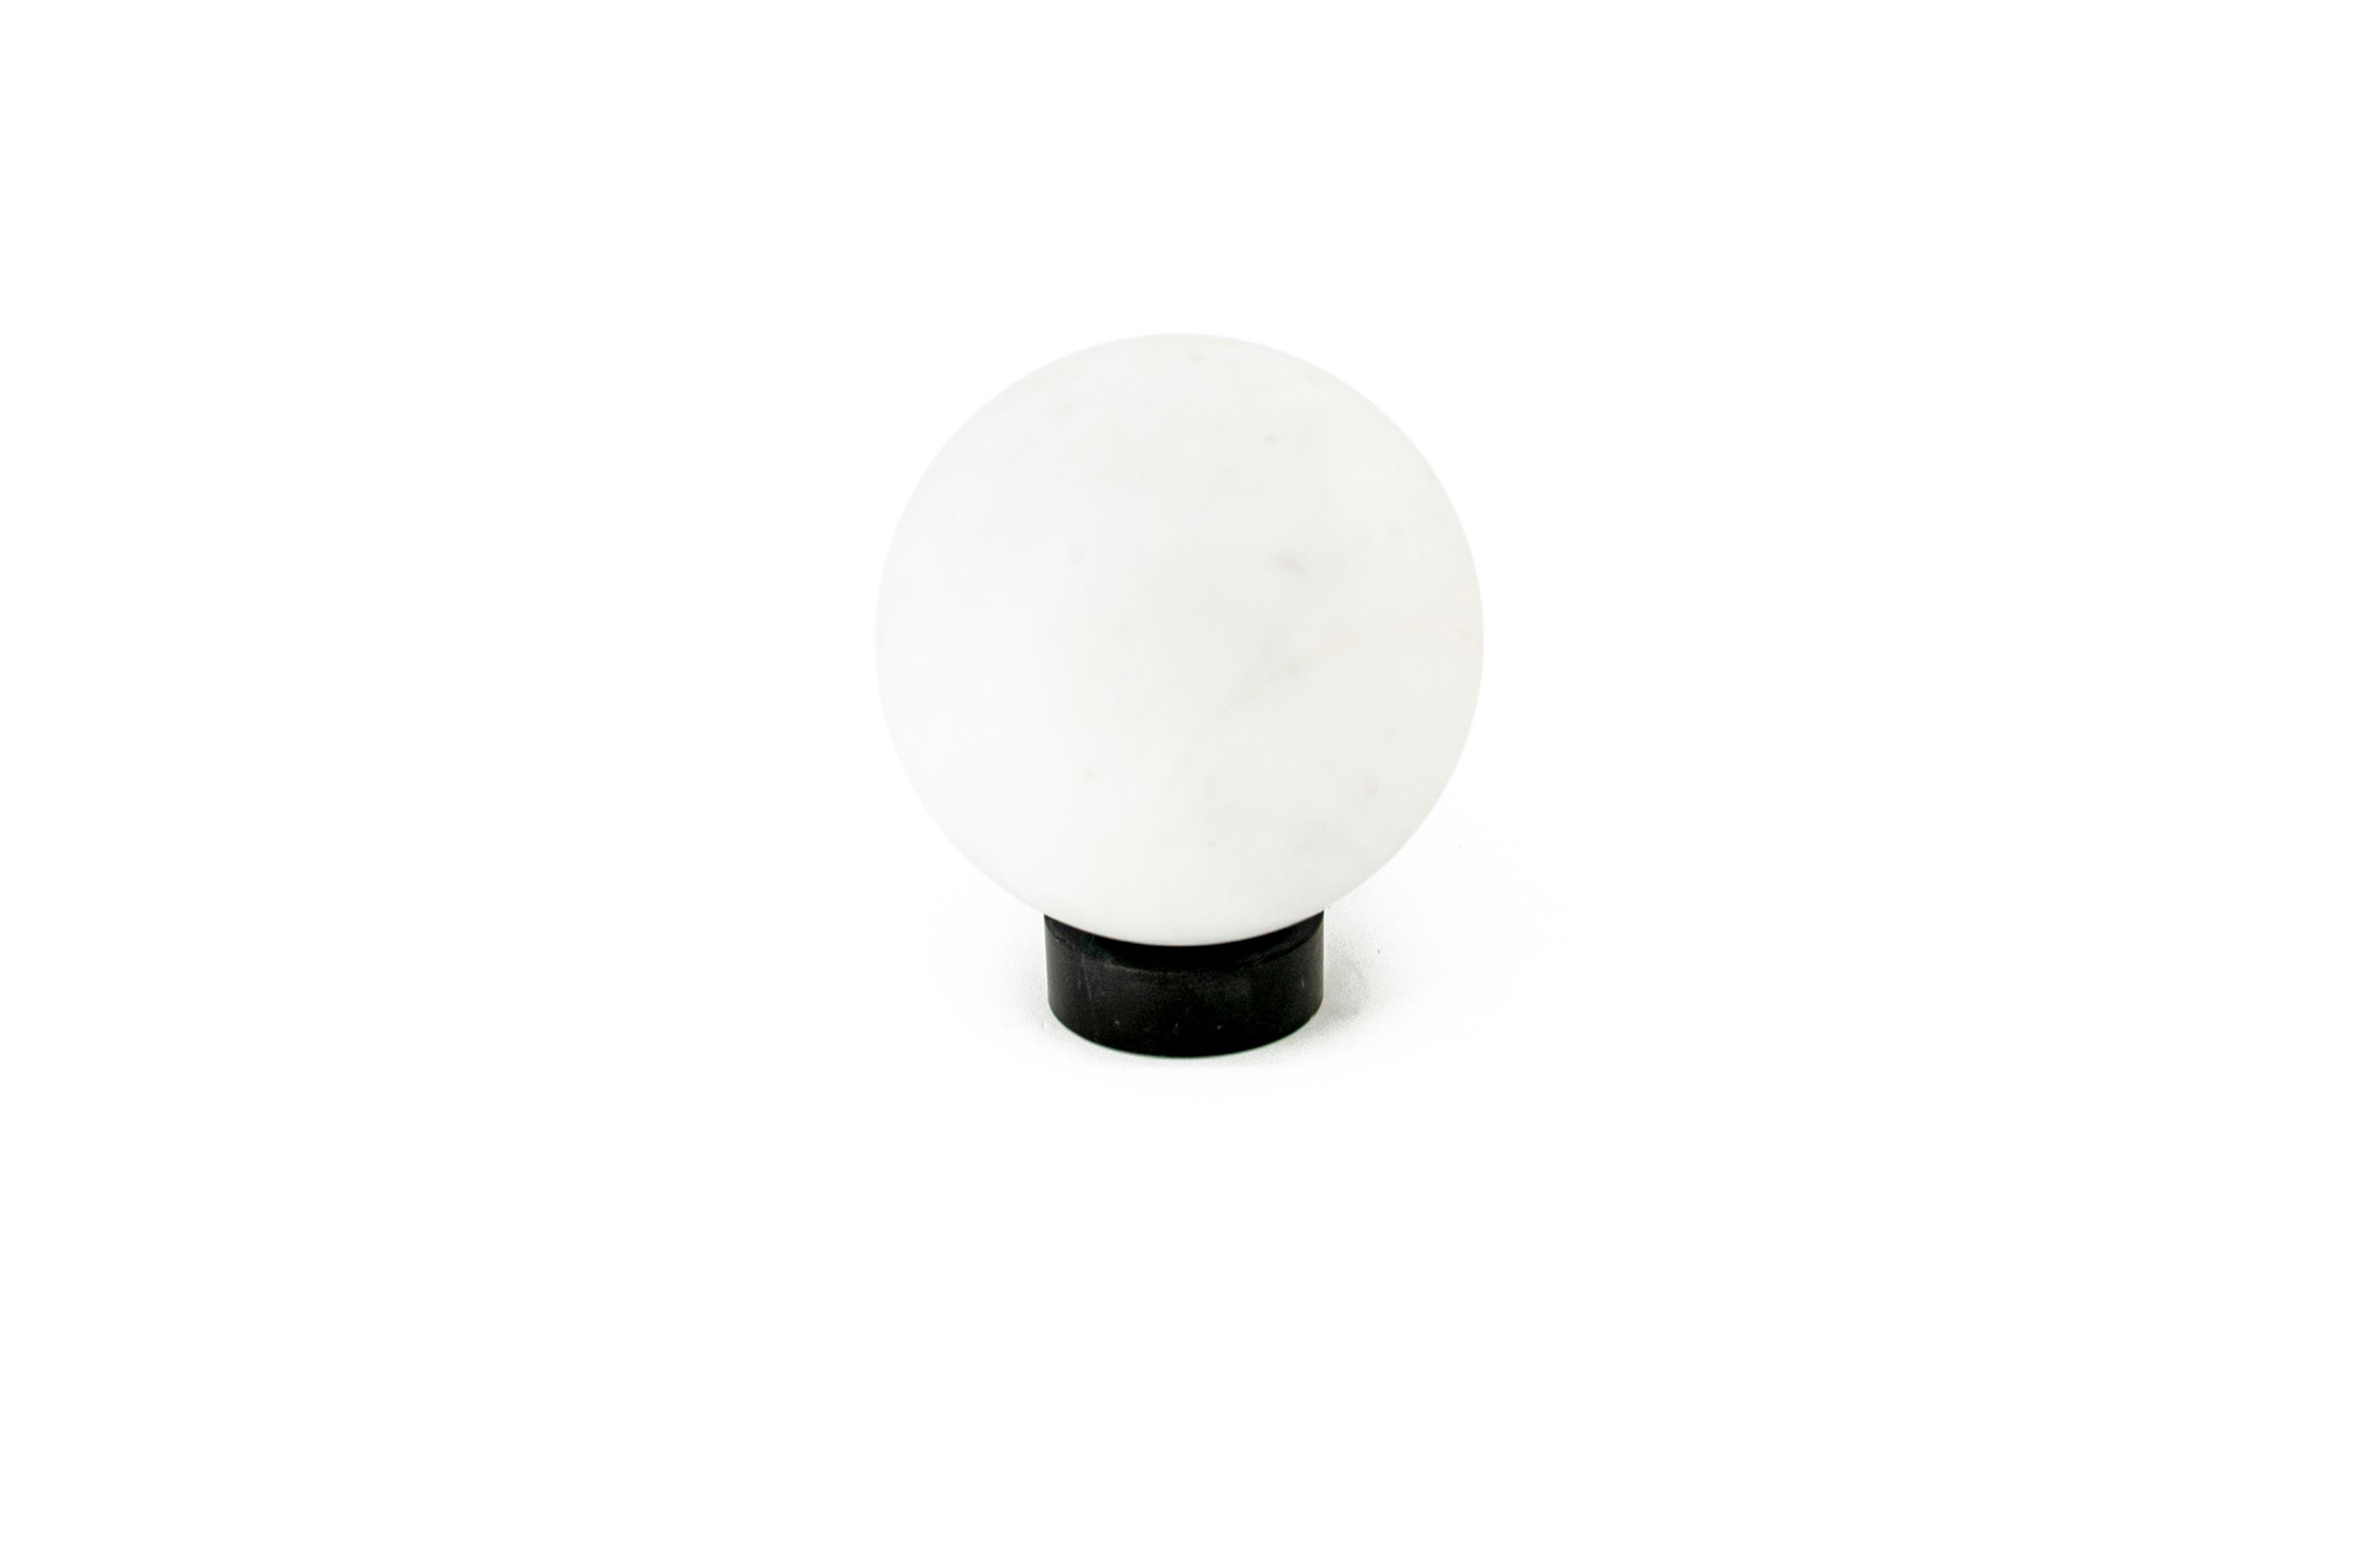 Handmade Medium Paperweight with Sphere Shape in Satin White Carrara Marble For Sale 2